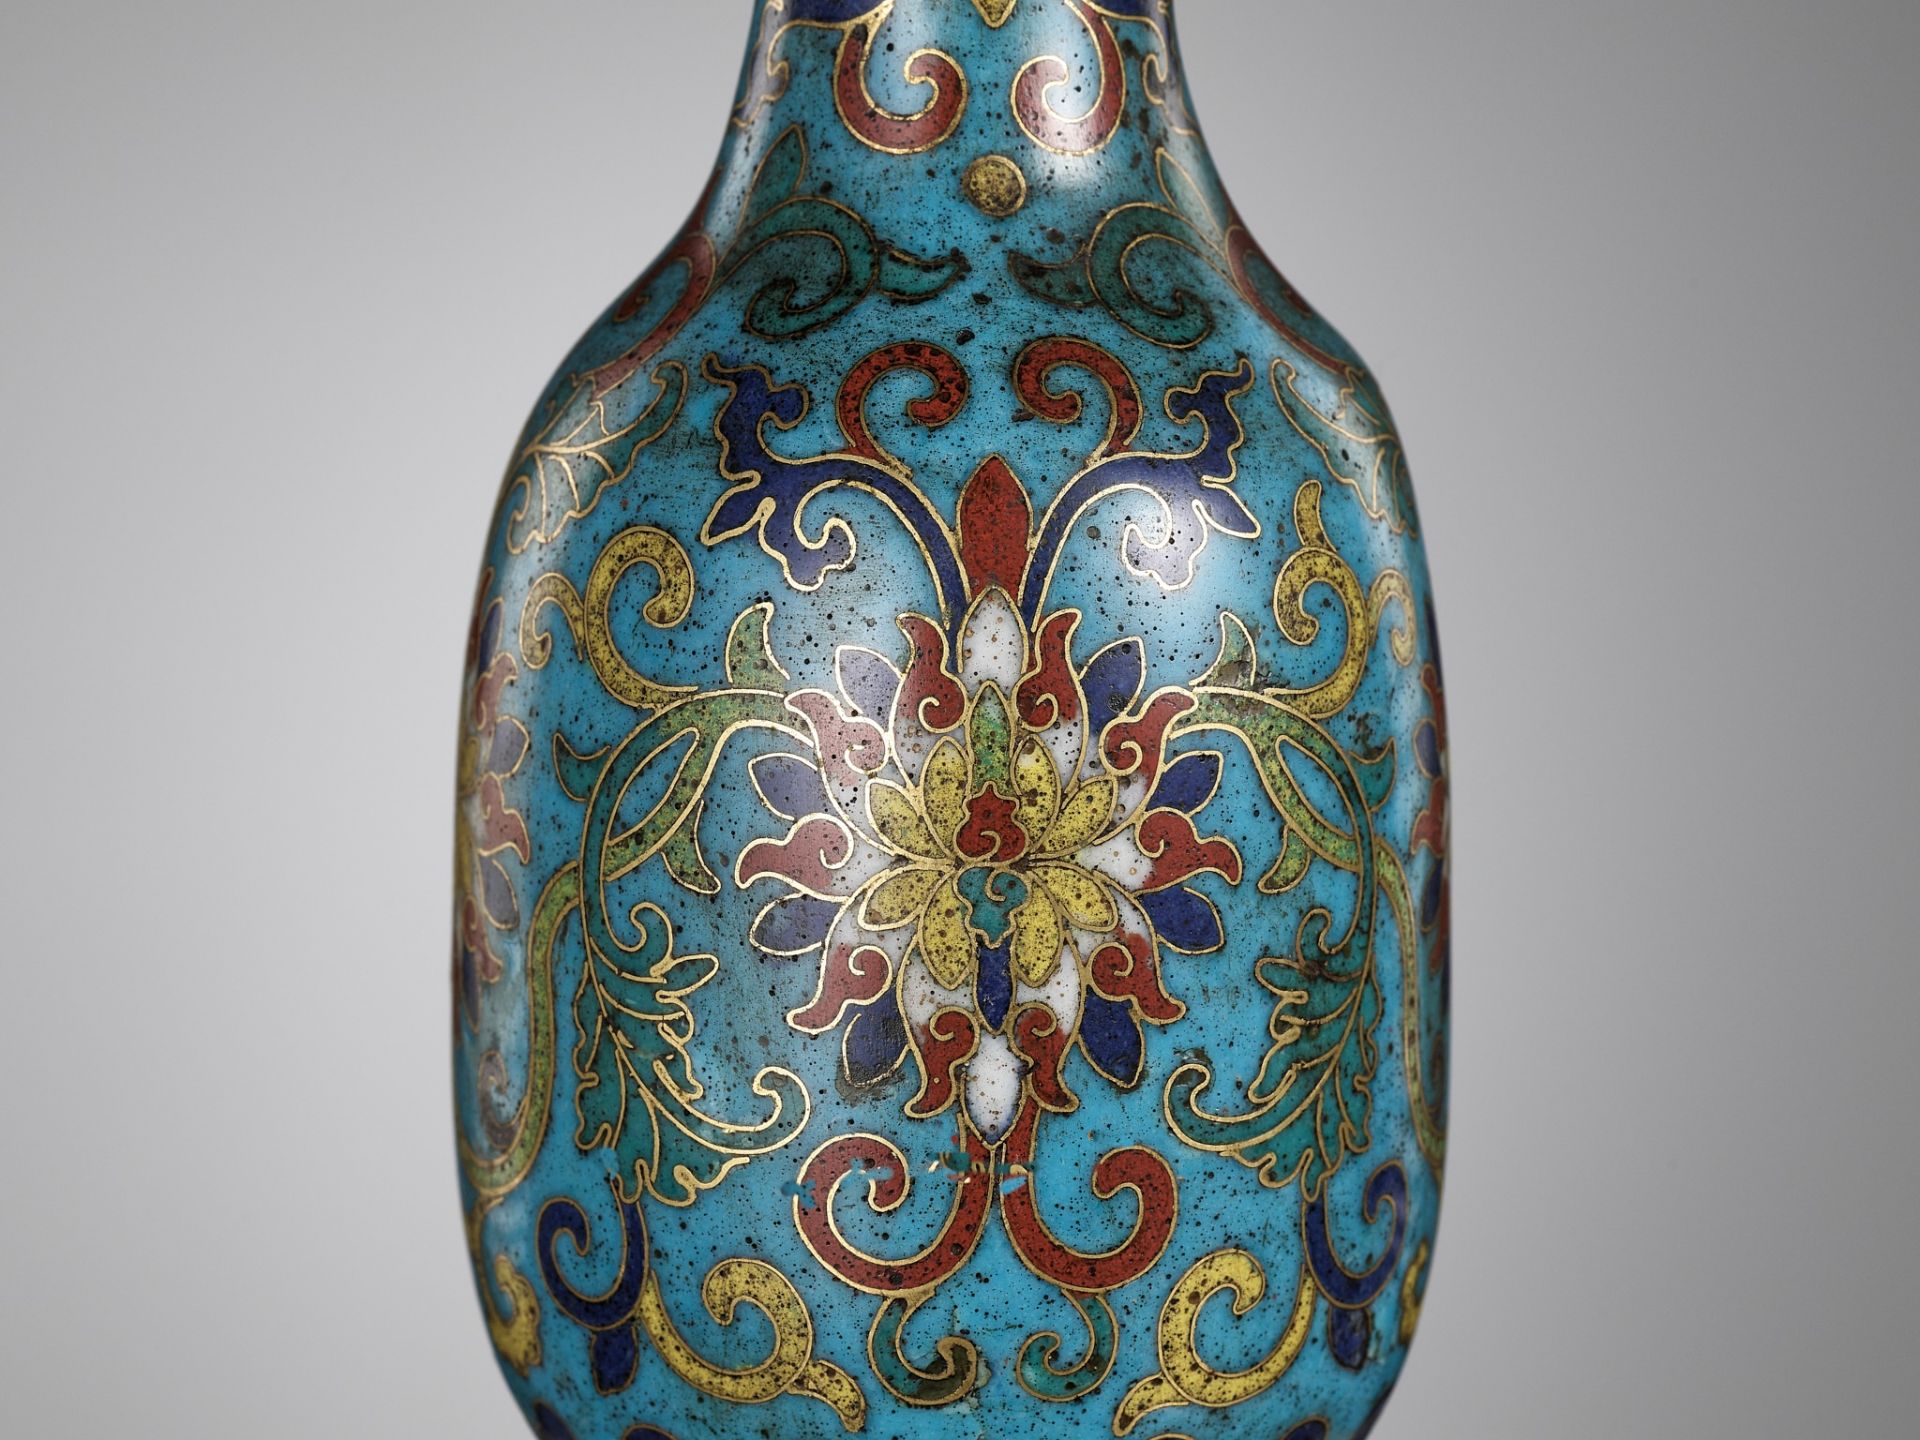 A CLOISONNE ENAMEL MALLET VASE, QIANLONG FIVE-CHARACTER MARK AND OF THE PERIOD - Image 8 of 14